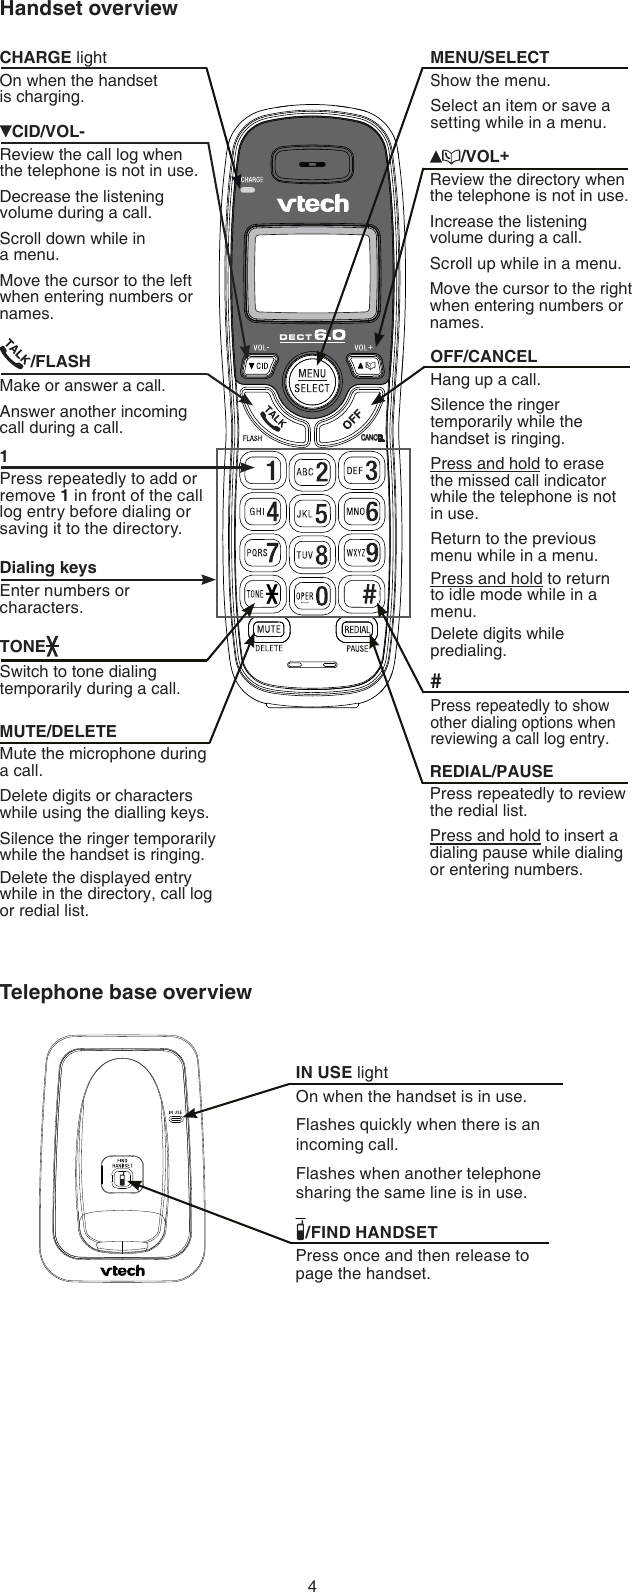 4Handset overview/FIND HANDSET Press once and then release to page the handset.IN USE lightOn when the handset is in use.Flashes quickly when there is an incoming call.Flashes when another telephone sharing the same line is in use.Telephone base overviewCID/VOL-Review the call log when the telephone is not in use.Decrease the listening volume during a call.Scroll down while in  a menu.Move the cursor to the left when entering numbers or names./FLASHMake or answer a call.Answer another incoming call during a call.MUTE/DELETEMute the microphone during a call.Delete digits or characters while using the dialling keys.Silence the ringer temporarily while the handset is ringing.Delete the displayed entry while in the directory, call log or redial list.CHARGE lightOn when the handset  is charging.TONESwitch to tone dialing temporarily during a call.CANCELDialing keysEnter numbers or characters./VOL+Review the directory when the telephone is not in use.Increase the listening volume during a call.Scroll up while in a menu.Move the cursor to the right when entering numbers or names.MENU/SELECTShow the menu.Select an item or save a setting while in a menu.OFF/CANCELHang up a call.Silence the ringer temporarily while the handset is ringing.Press and hold to erase the missed call indicator while the telephone is not in use.Return to the previous menu while in a menu.Press and hold to return to idle mode while in a menu.Delete digits while predialing.REDIAL/PAUSEPress repeatedly to review the redial list.Press and hold to insert a dialing pause while dialing or entering numbers.#Press repeatedly to show other dialing options when reviewing a call log entry.1Press repeatedly to add or remove 1 in front of the call log entry before dialing or saving it to the directory.